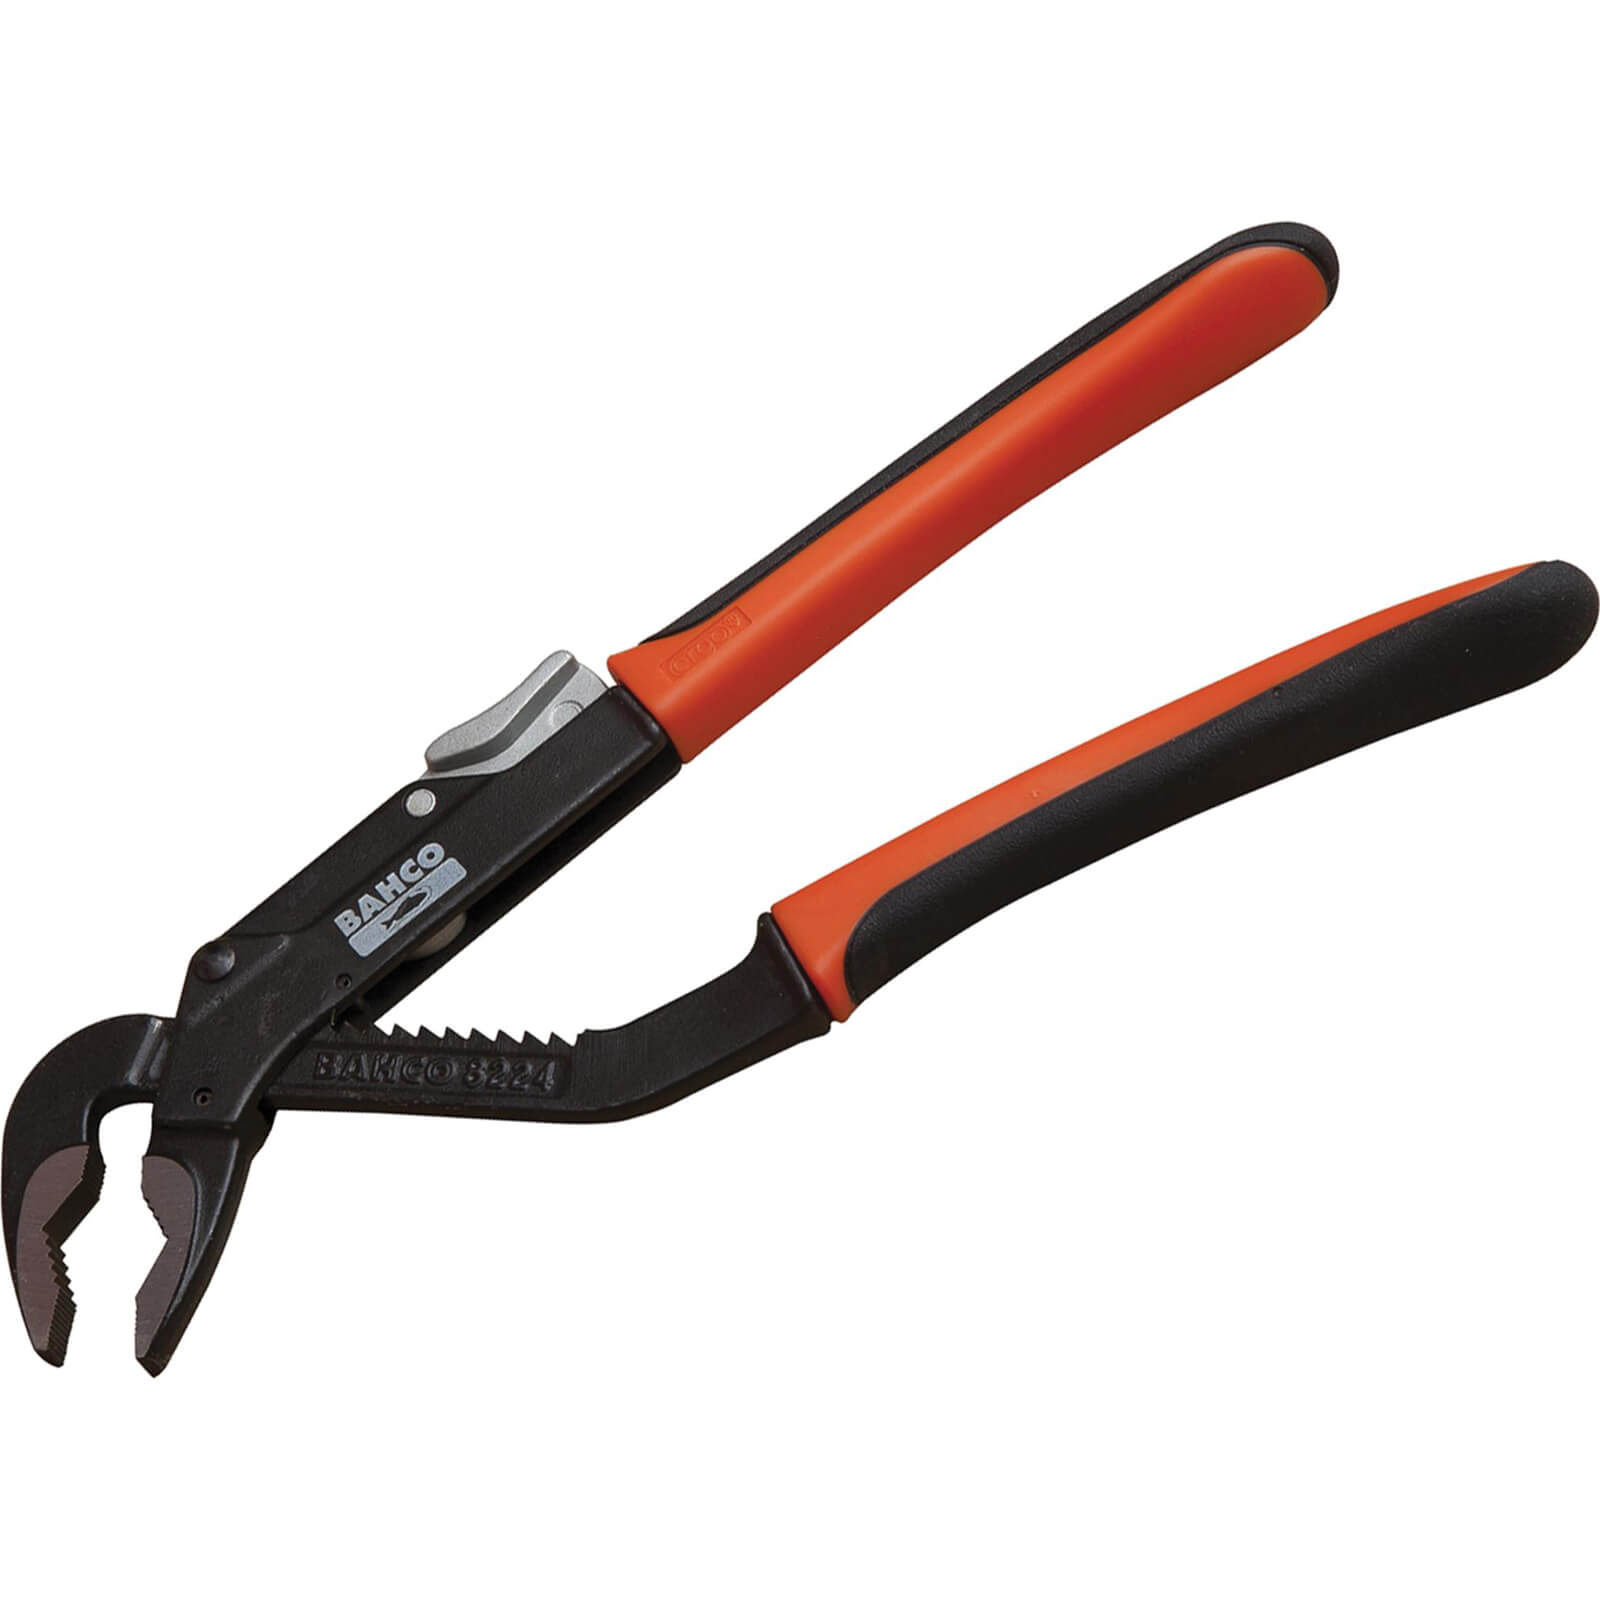 Bahco 822 Slip Joint Pliers Ergo Handle 200mm